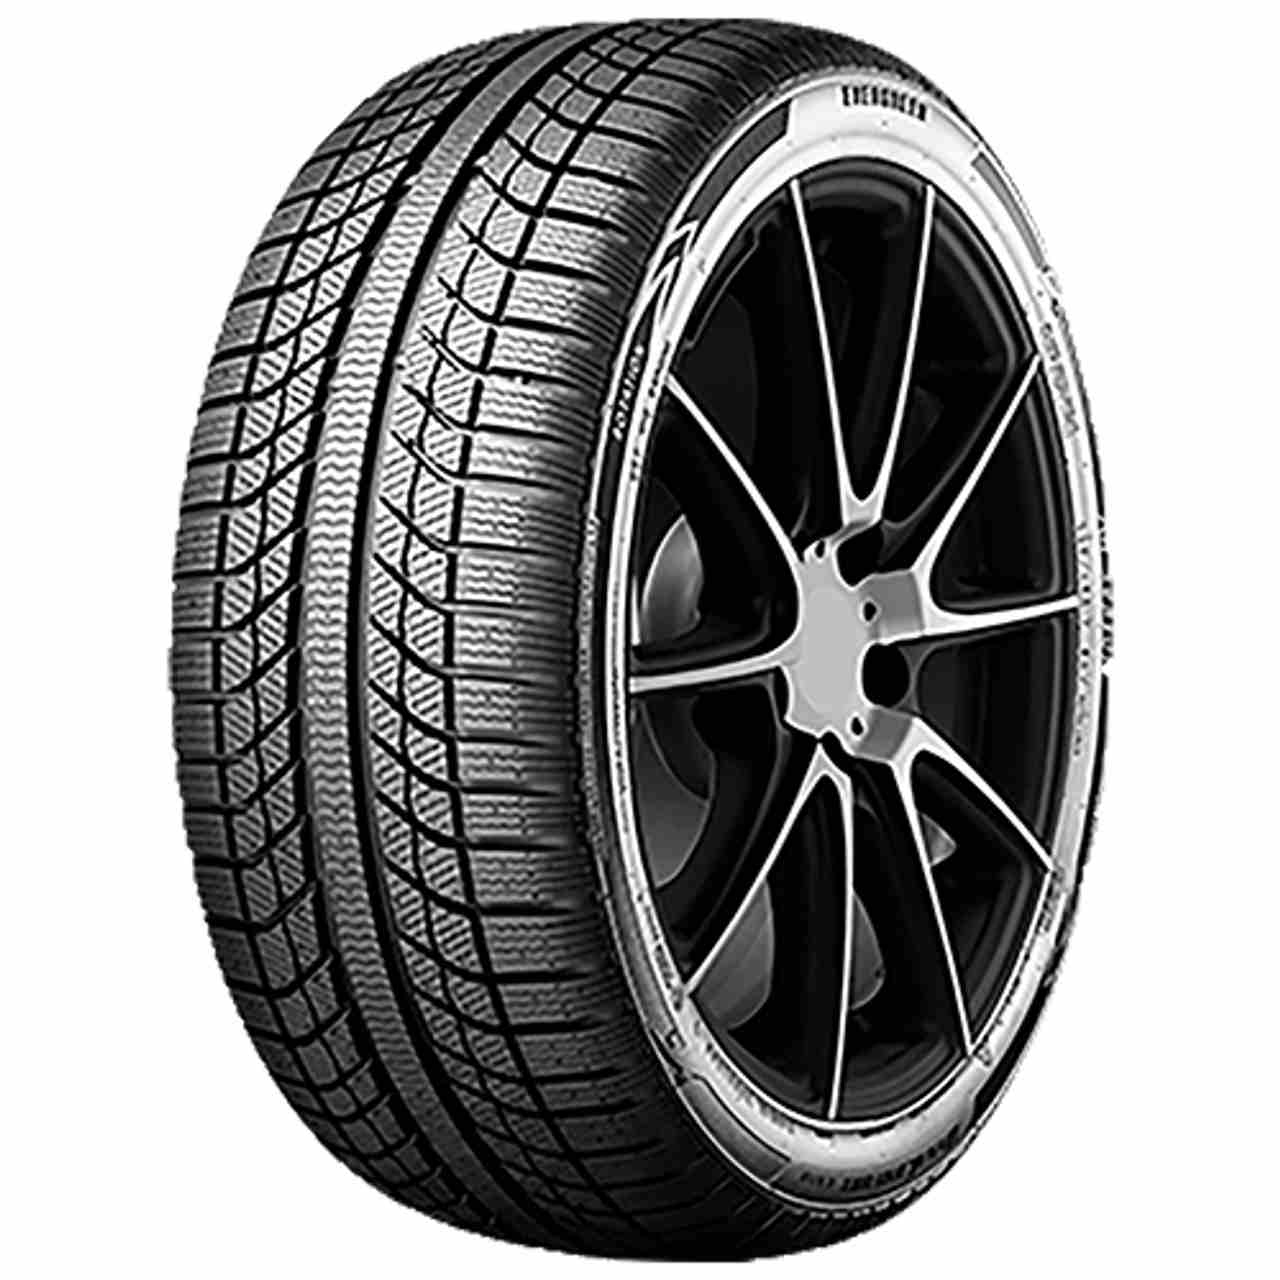 EVERGREEN DYNACOMFORT EA719 175/65R15 84T BSW